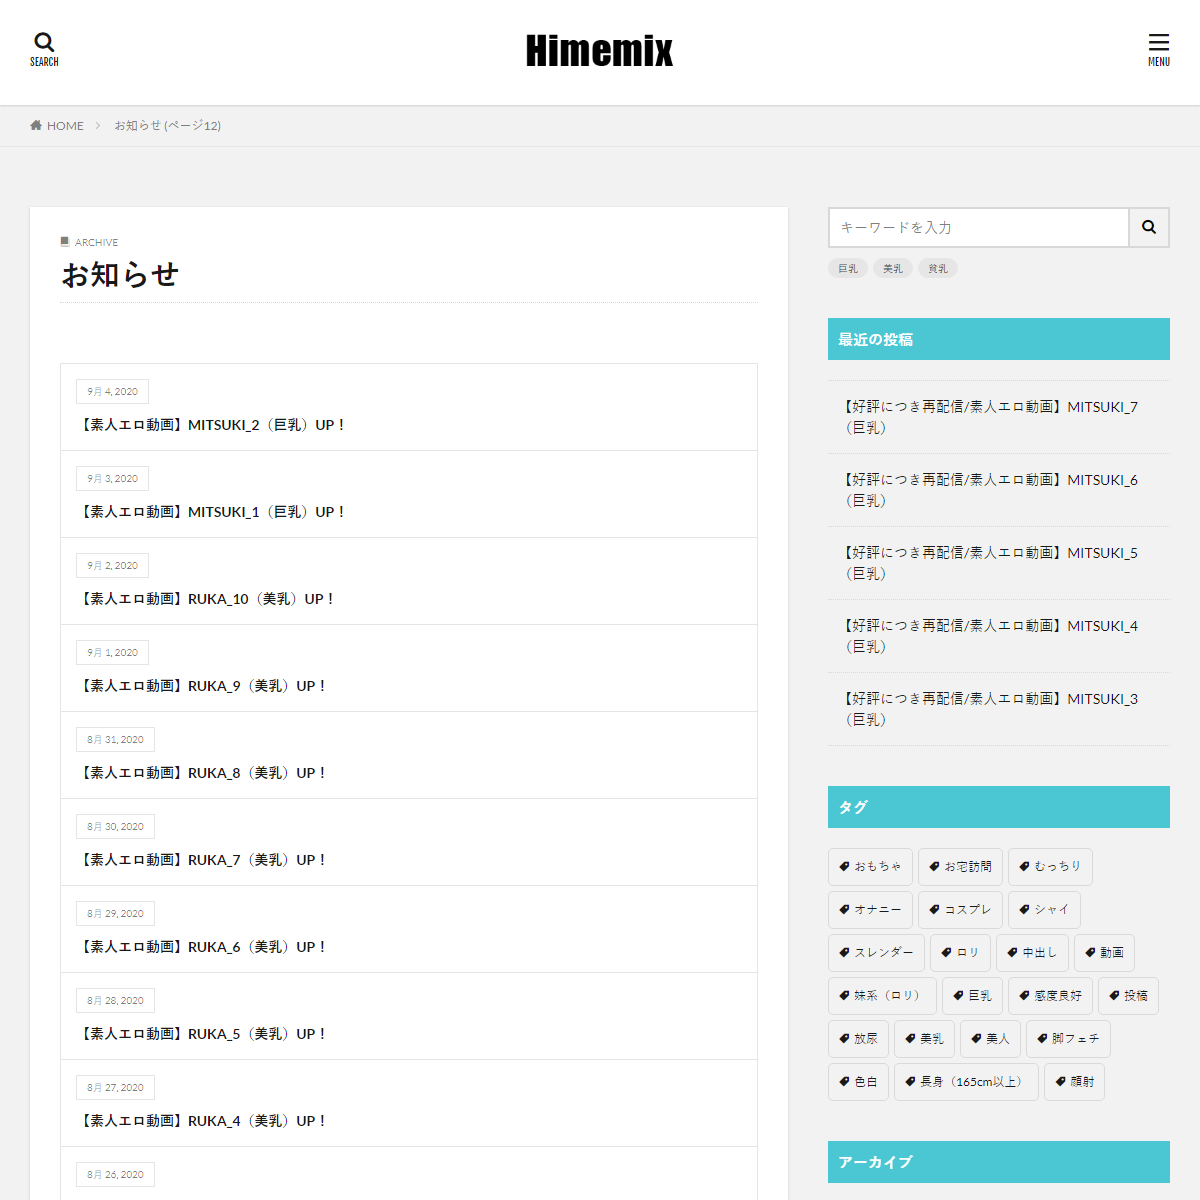 A complete backup of https://www.himemix.com/custom/page/12/